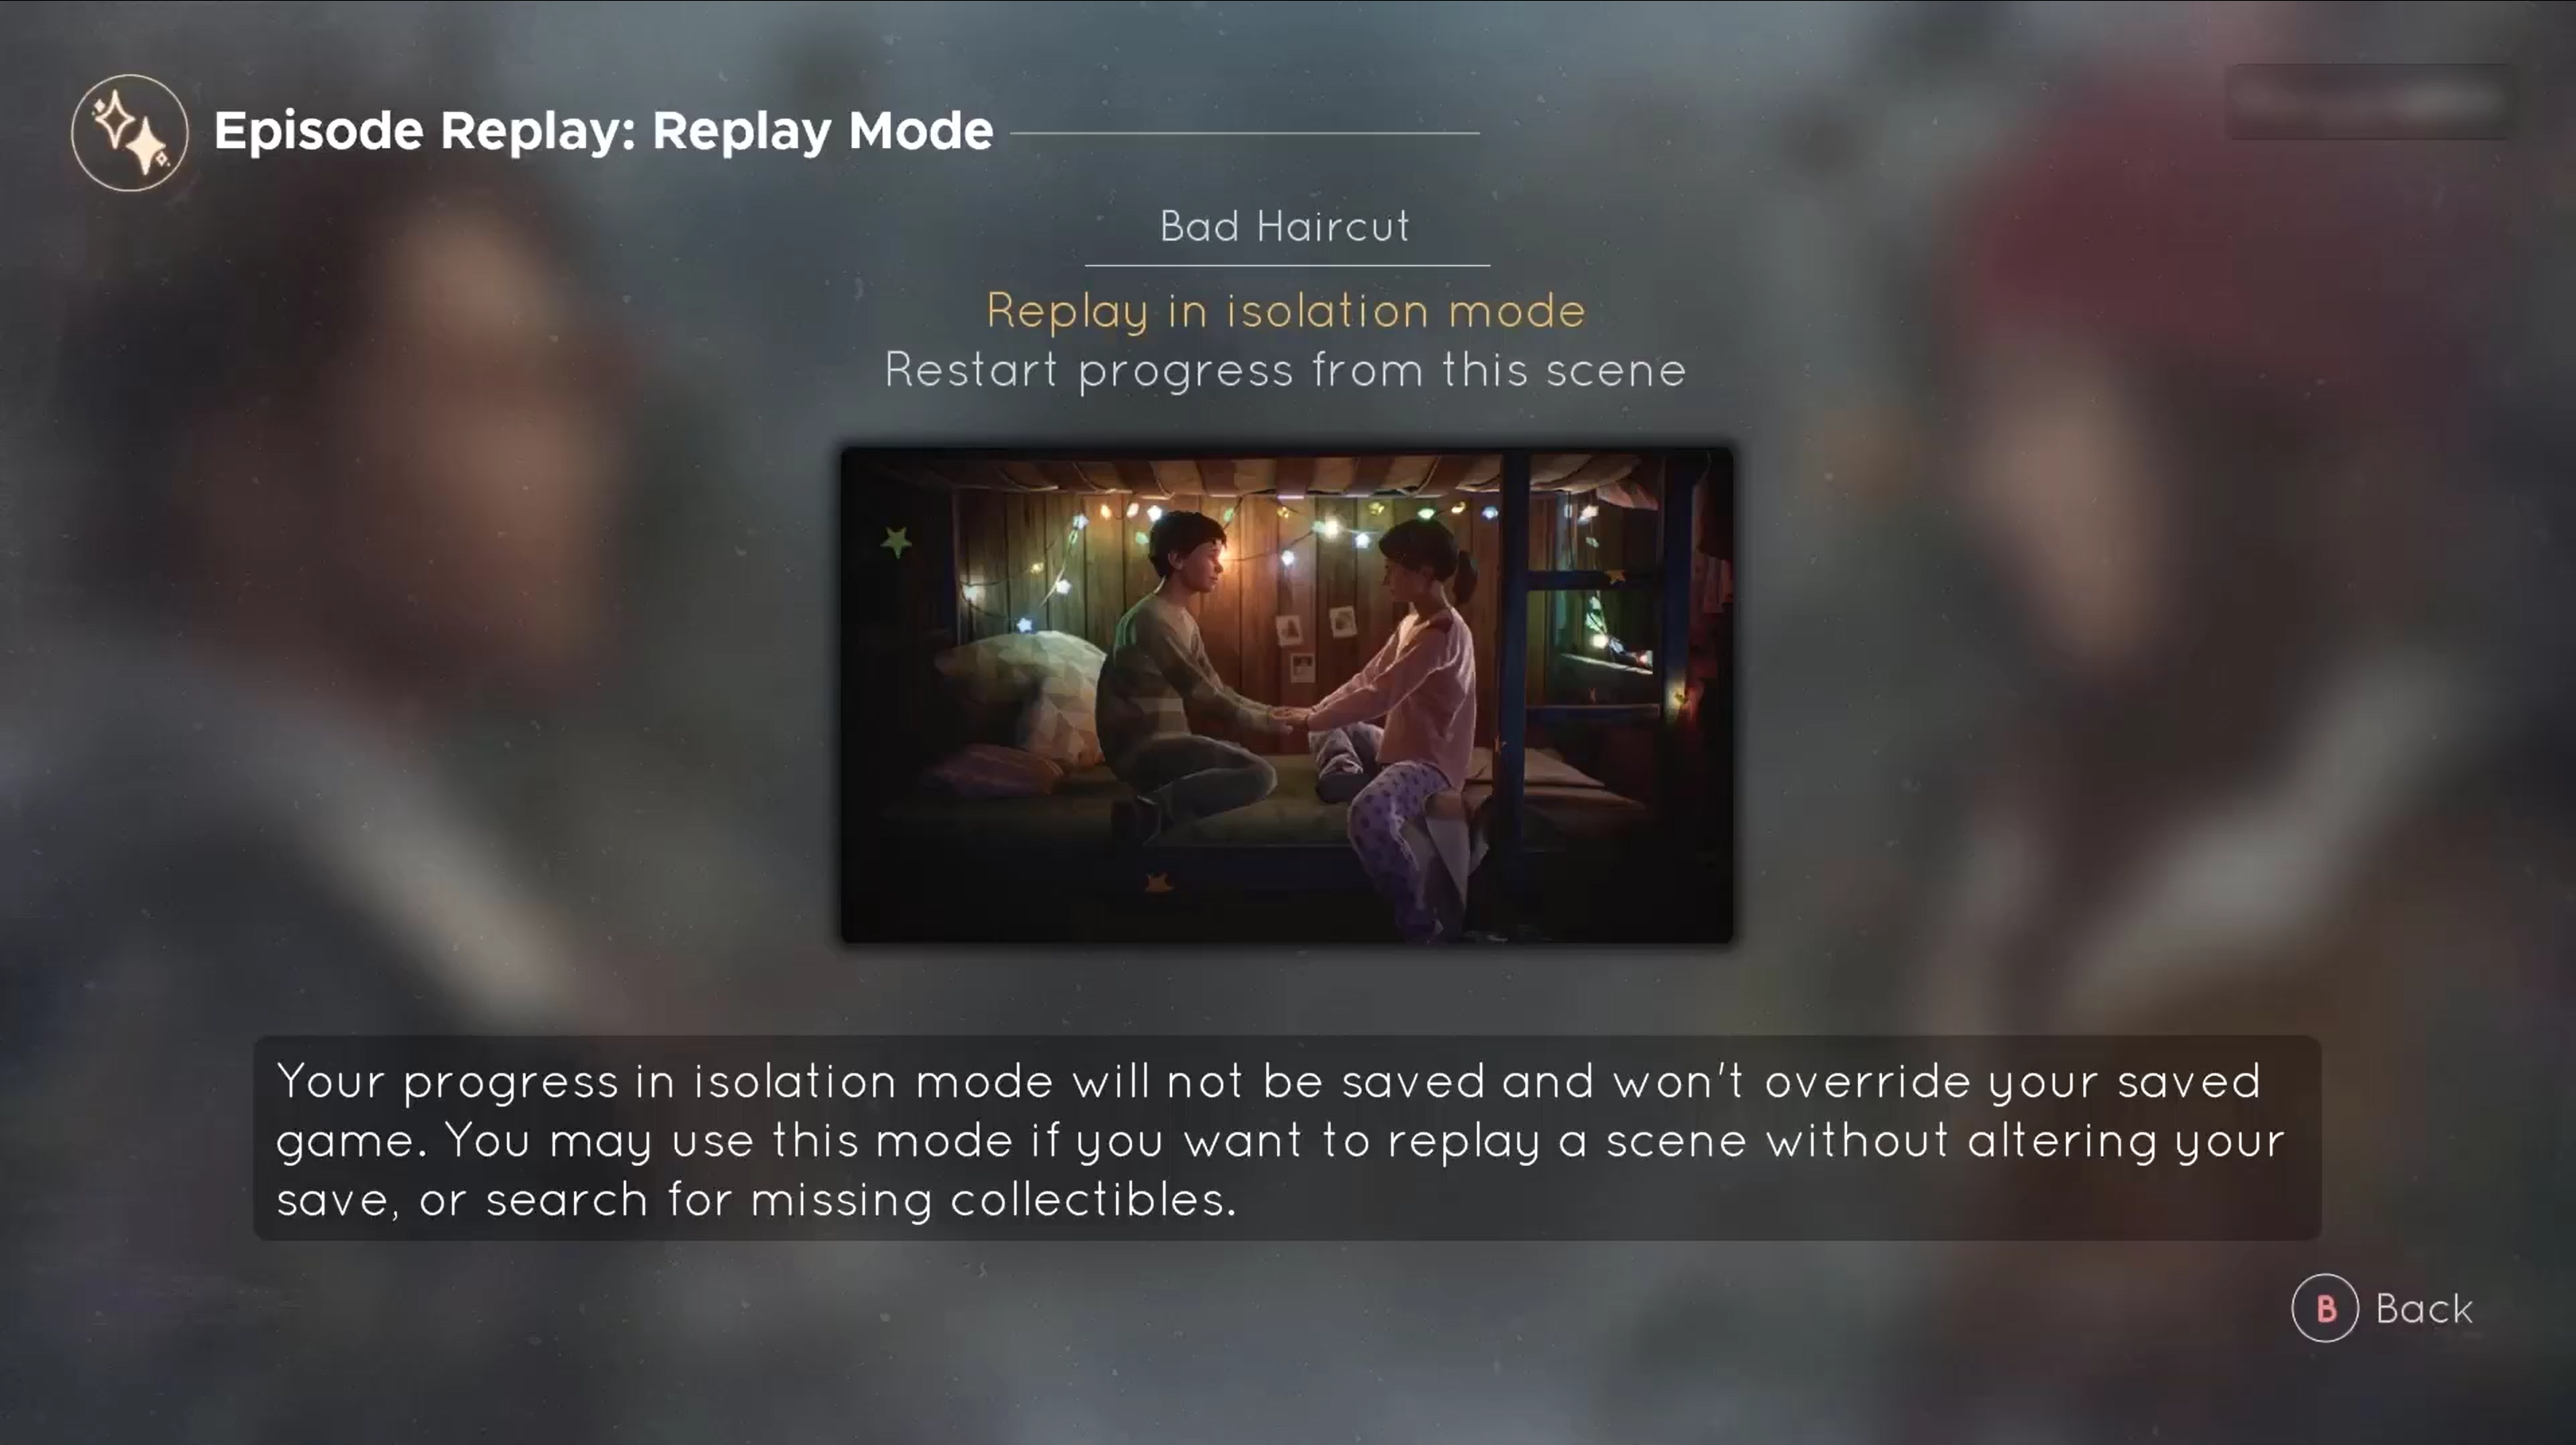 A screenshot from the Game Tell Me Why's episode replay mode. The restart progress from this scene option is selected. A visual of the cutscene selected is presented.